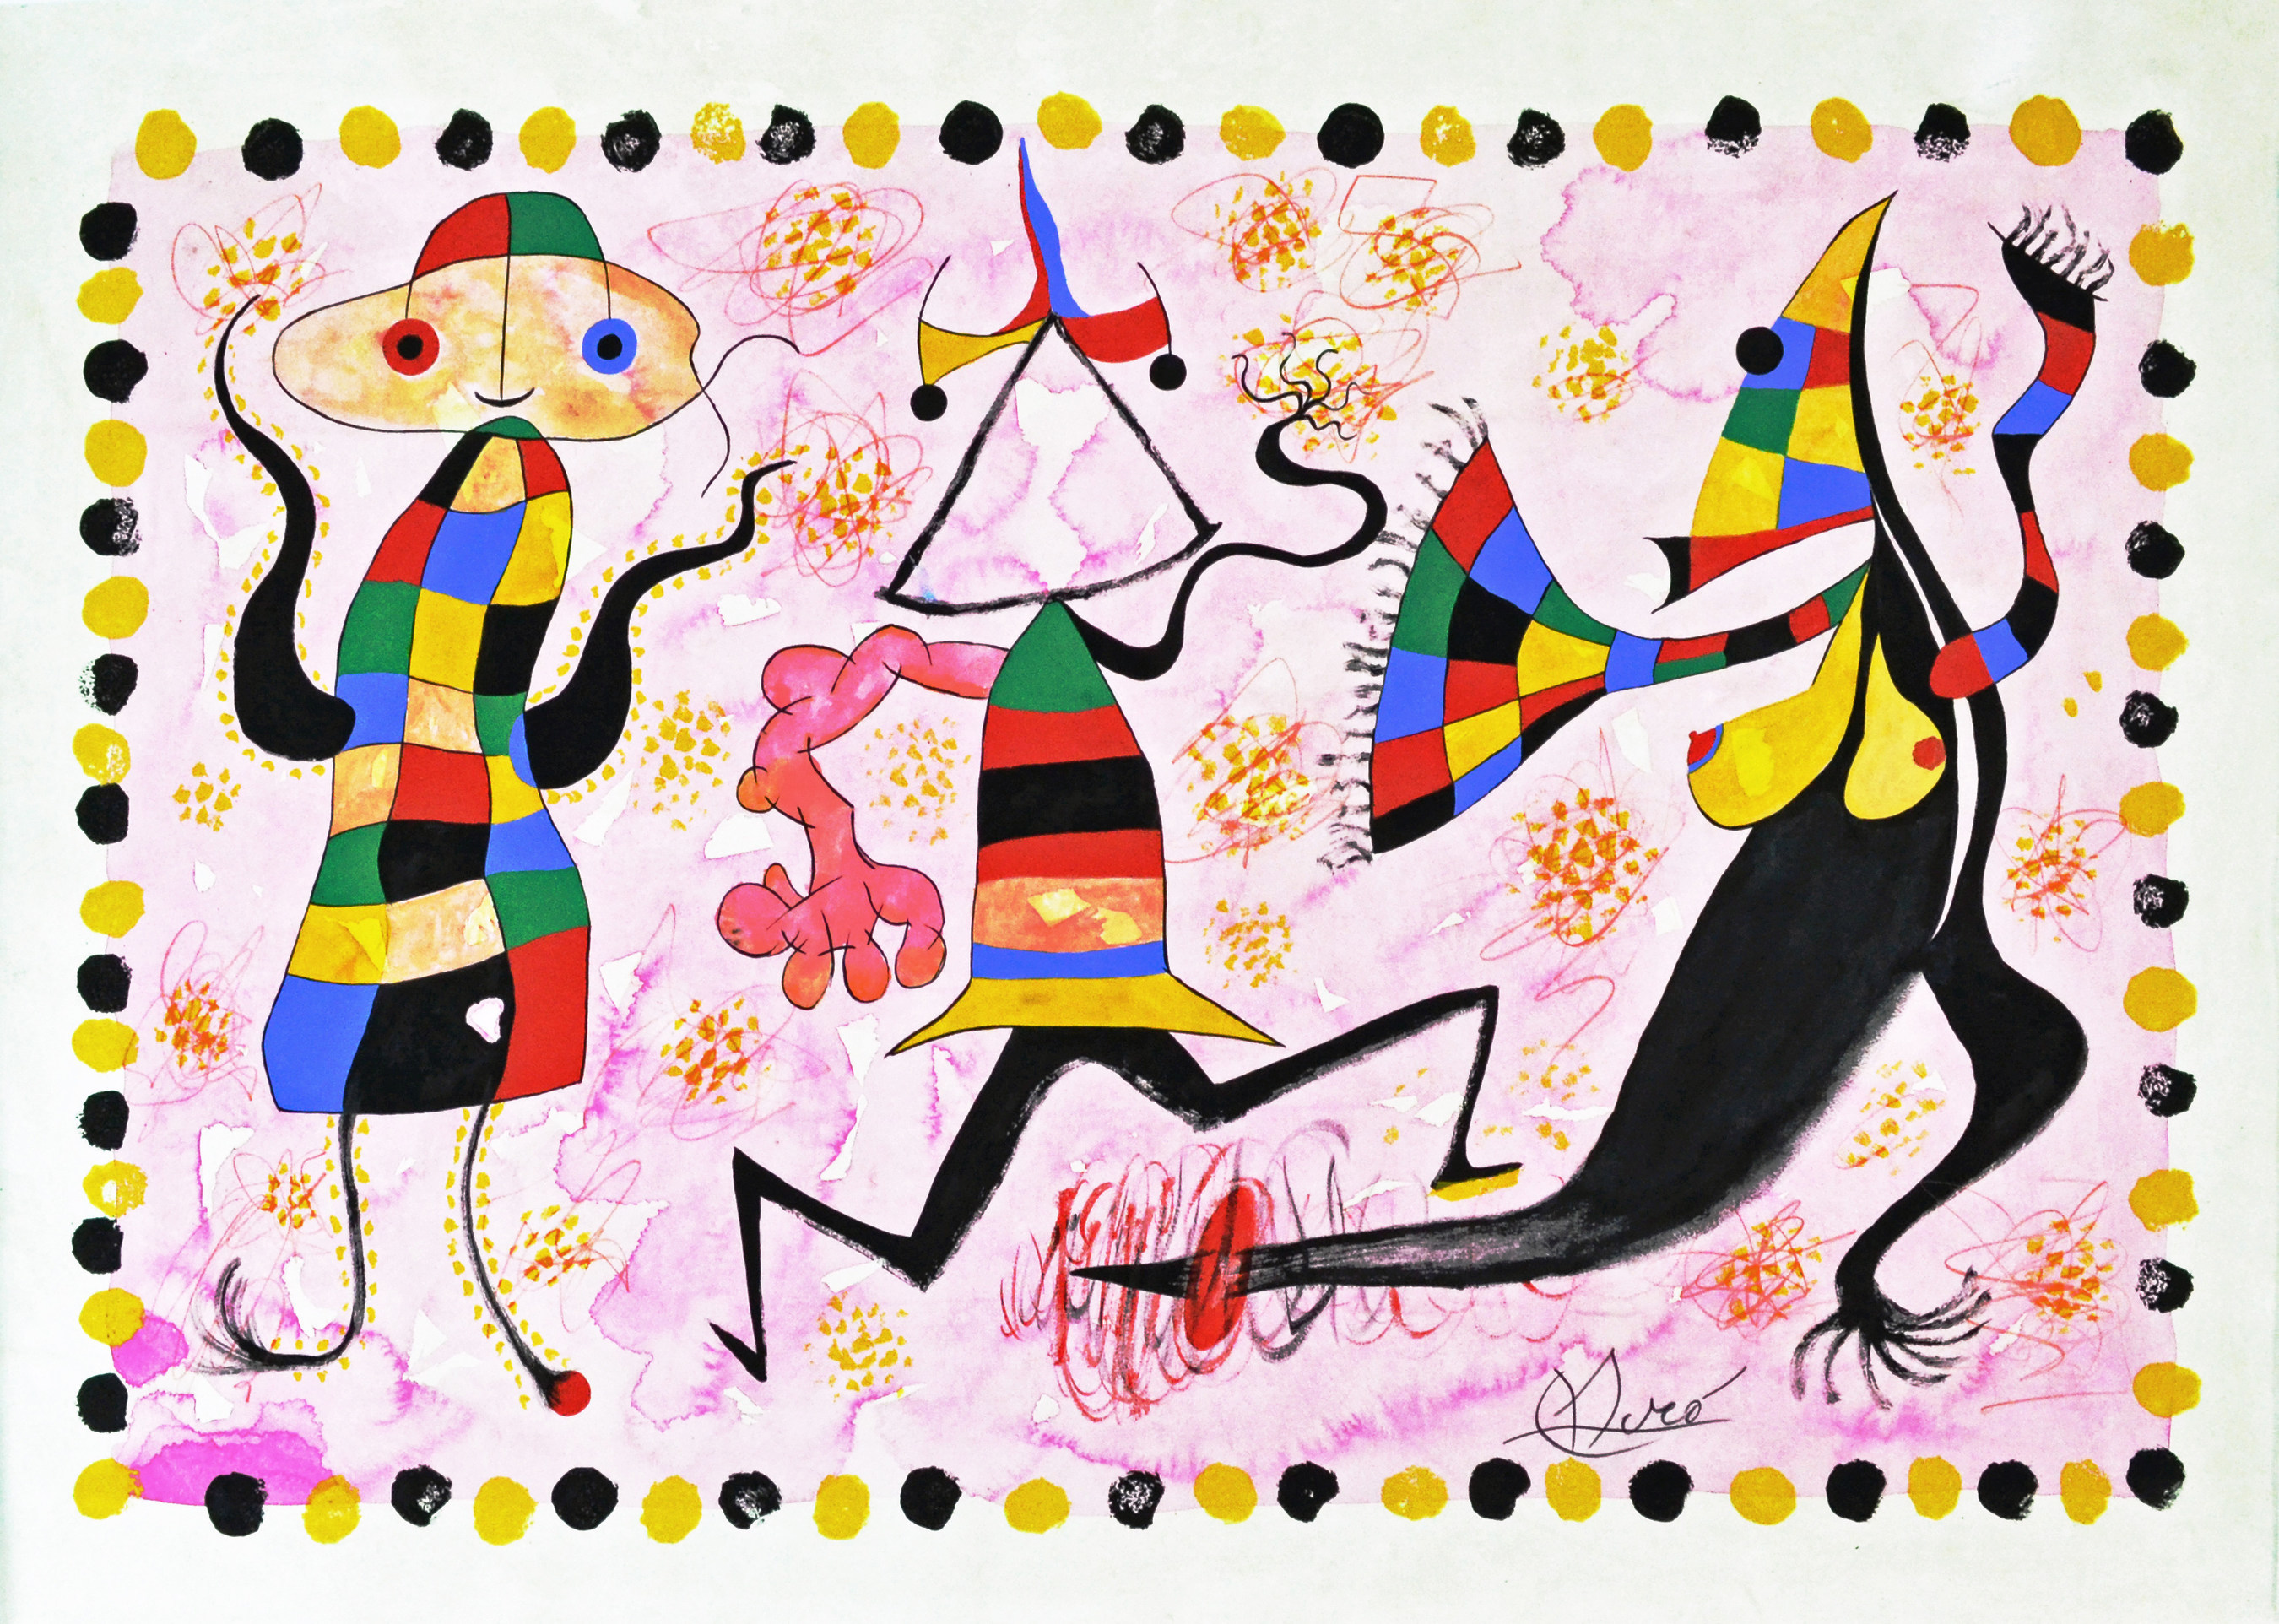 A rare Joan Miro watercolor and gouache painting will be auctioned on Thurs., April 30, 2015 at J. Levine Auction & Appraisal in Scottsdale, Arizona. Other items hitting the auction block include an original Ocean's 11 movie poster signed by the Rat Pack, the first edition of Playboy magazine featuring Marilyn Monroe, an original Picasso pencil drawing, an Andy Warhol offset lithograph, and Zane Grey courtship letters to his future wife. www.jlevines.com